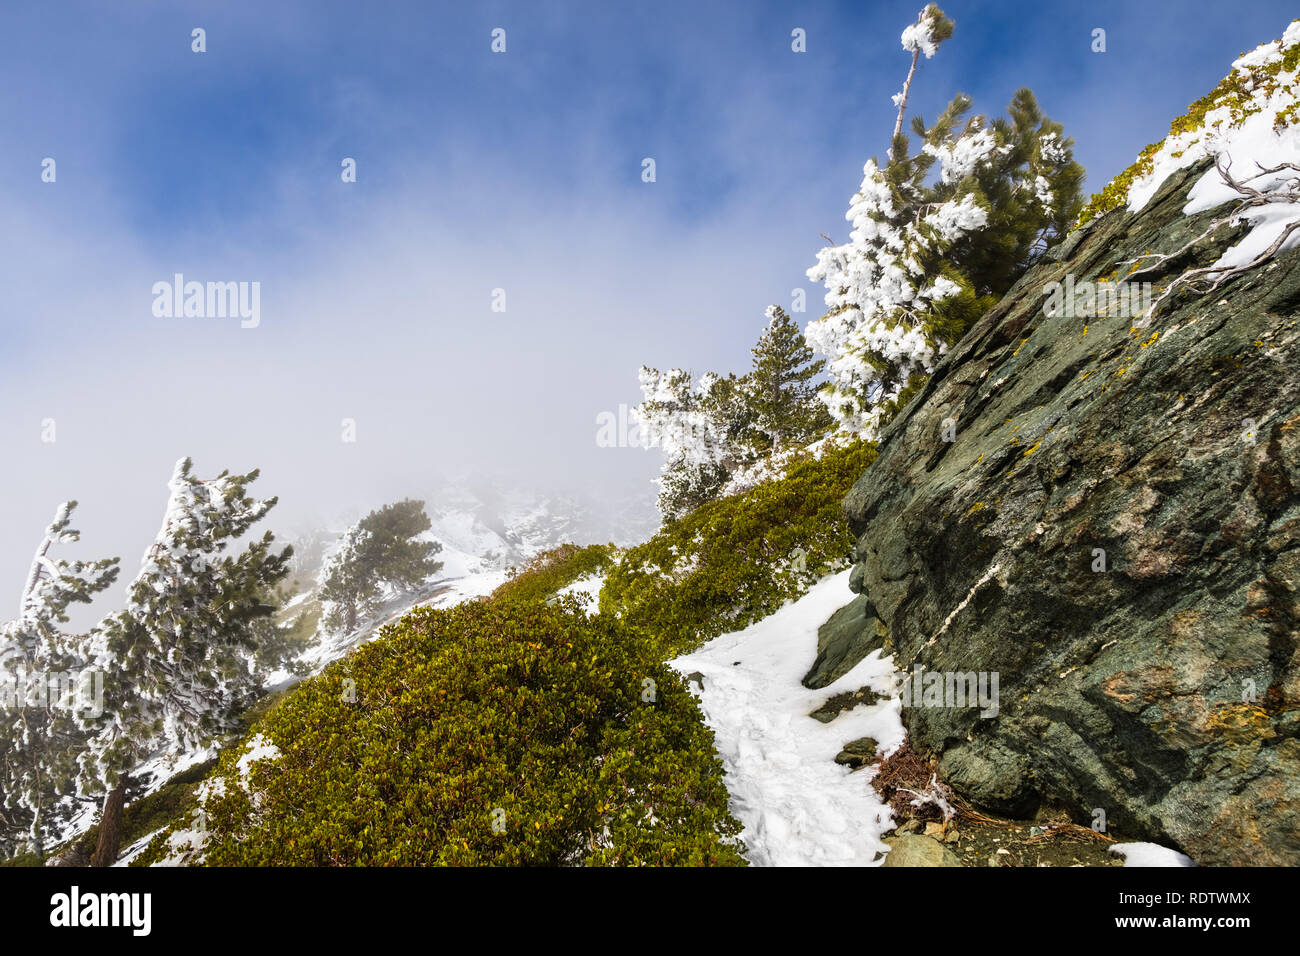 Narrow Hiking trail on the slopes of Mount San Antonio (Mt Baldy) covered in snow on a winter day; fog rising from the valley and covering the sky in  Stock Photo